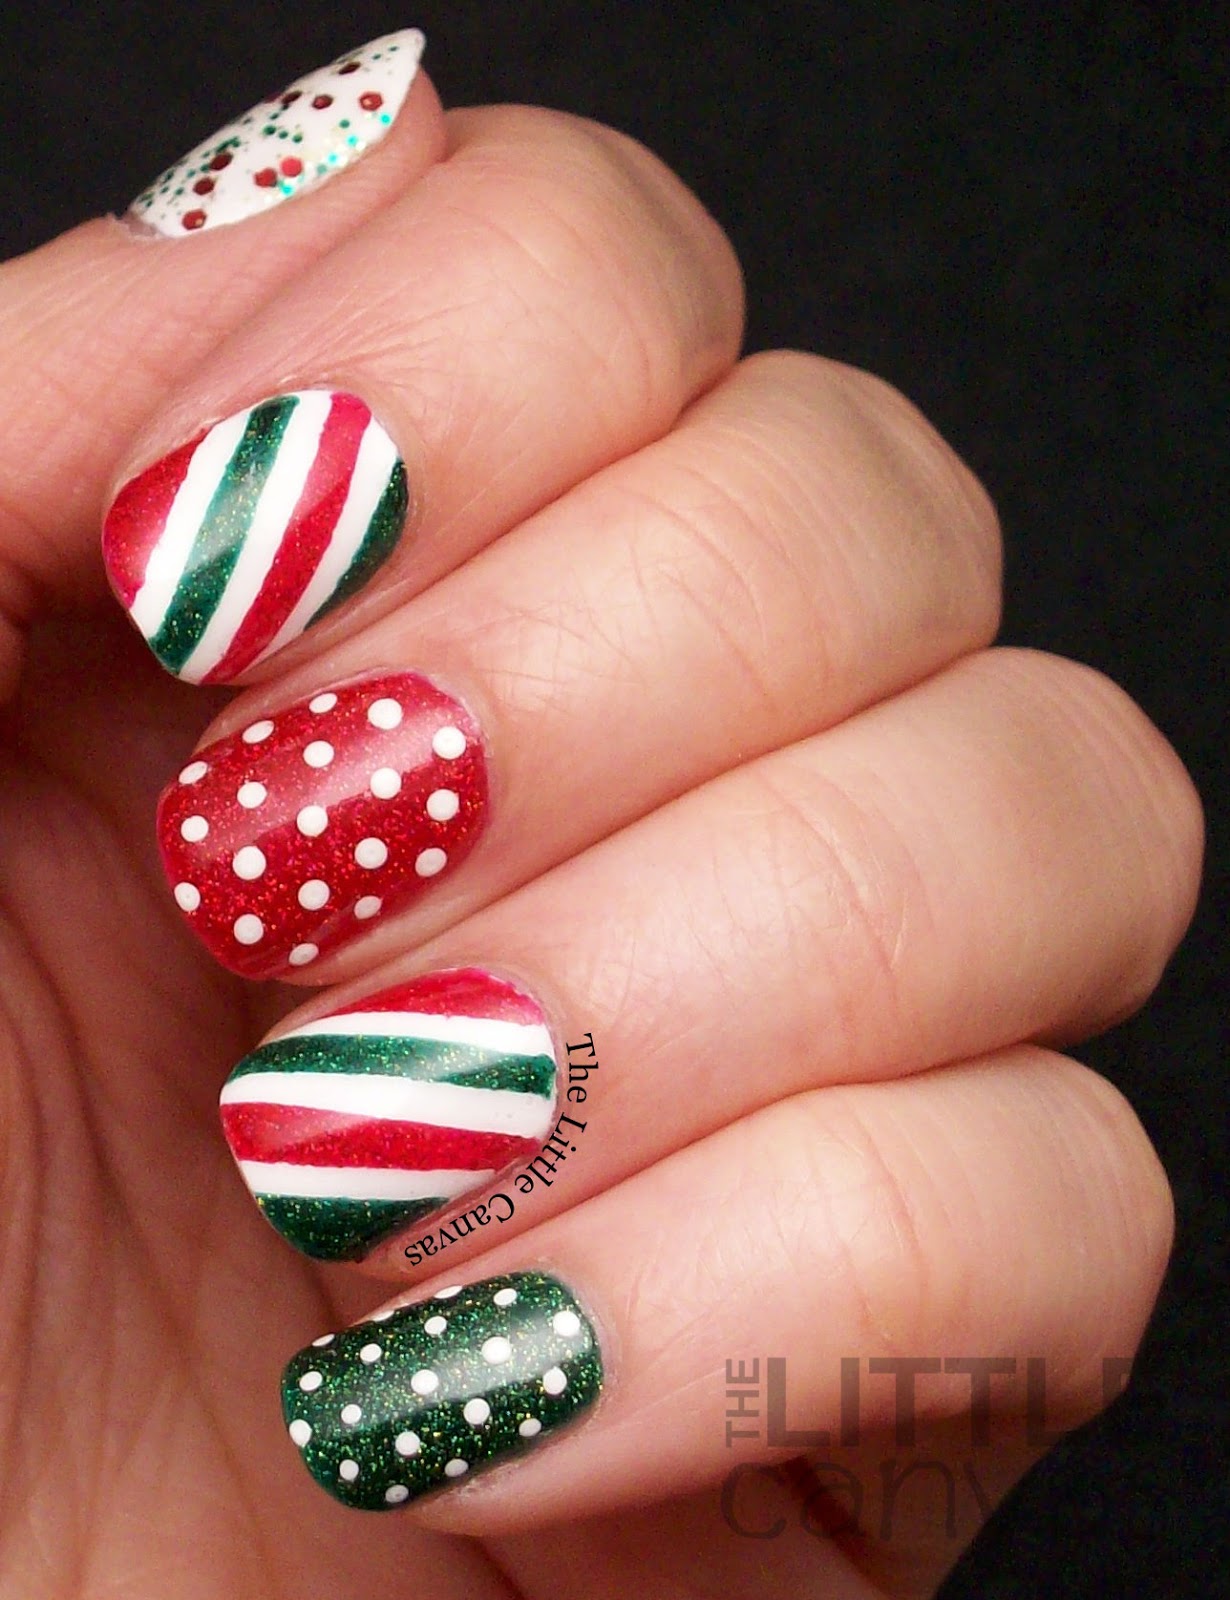 Twinsie Tuesday: Special Holiday Manicure! - The Little Canvas